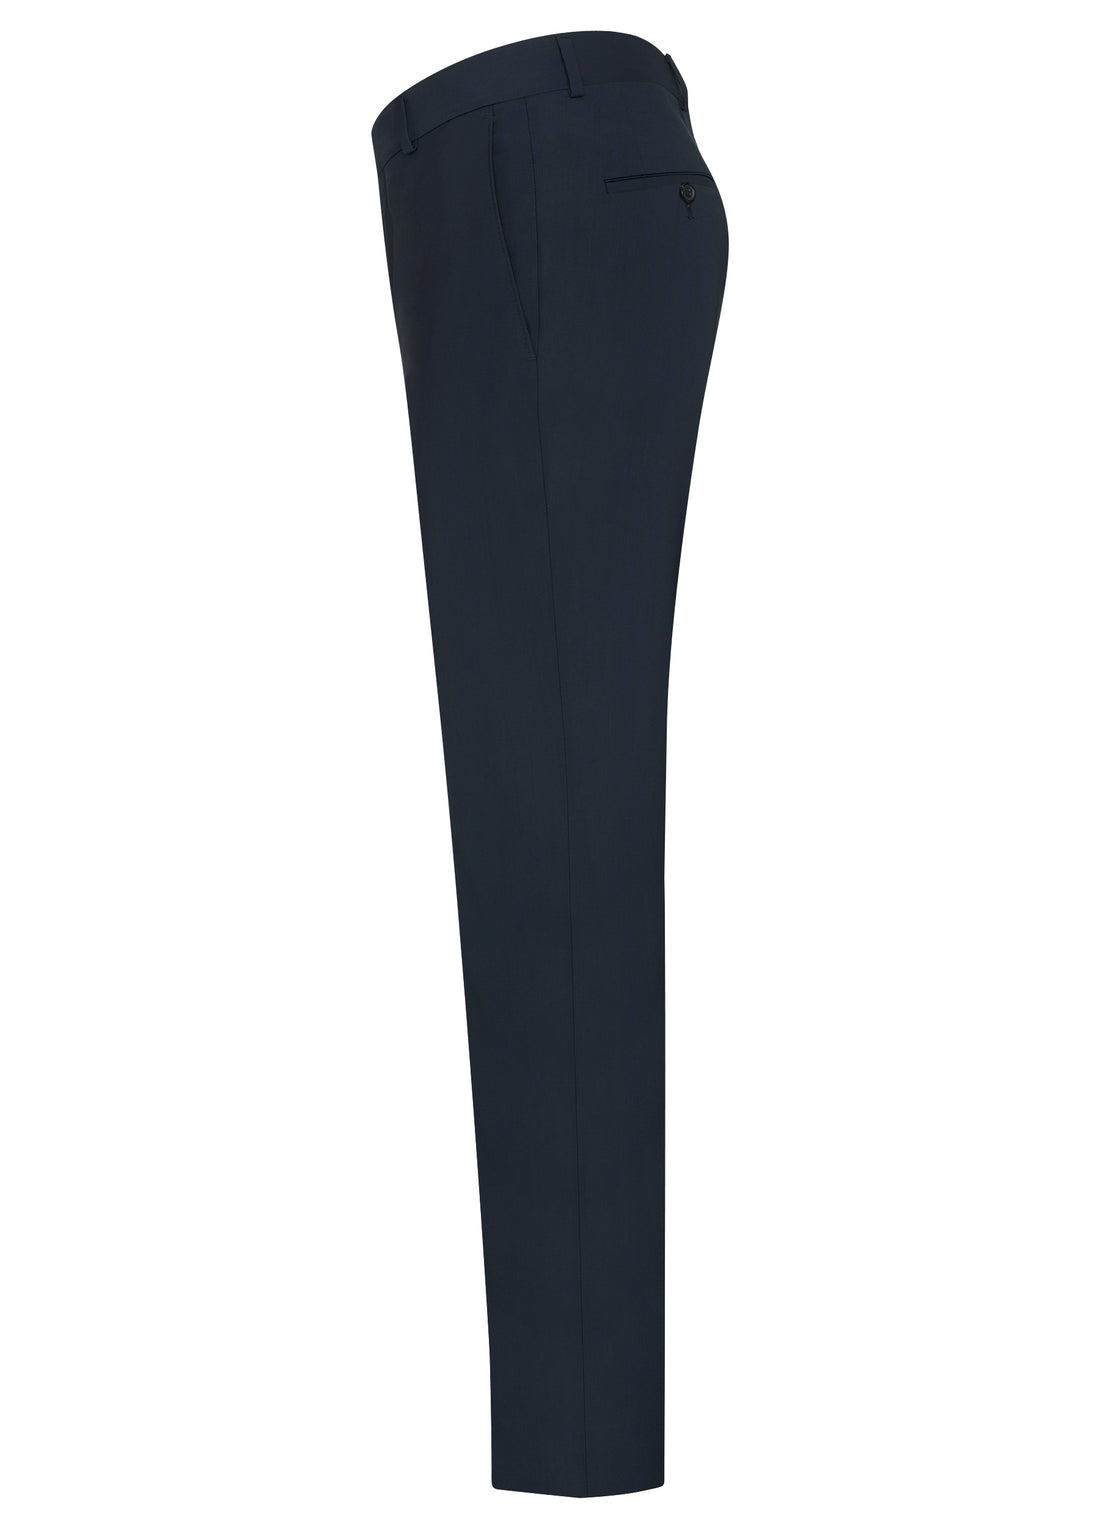 Navy Ice Wool Suit - Classic Fit Navy Ice Wool Suit - Classic Fit 